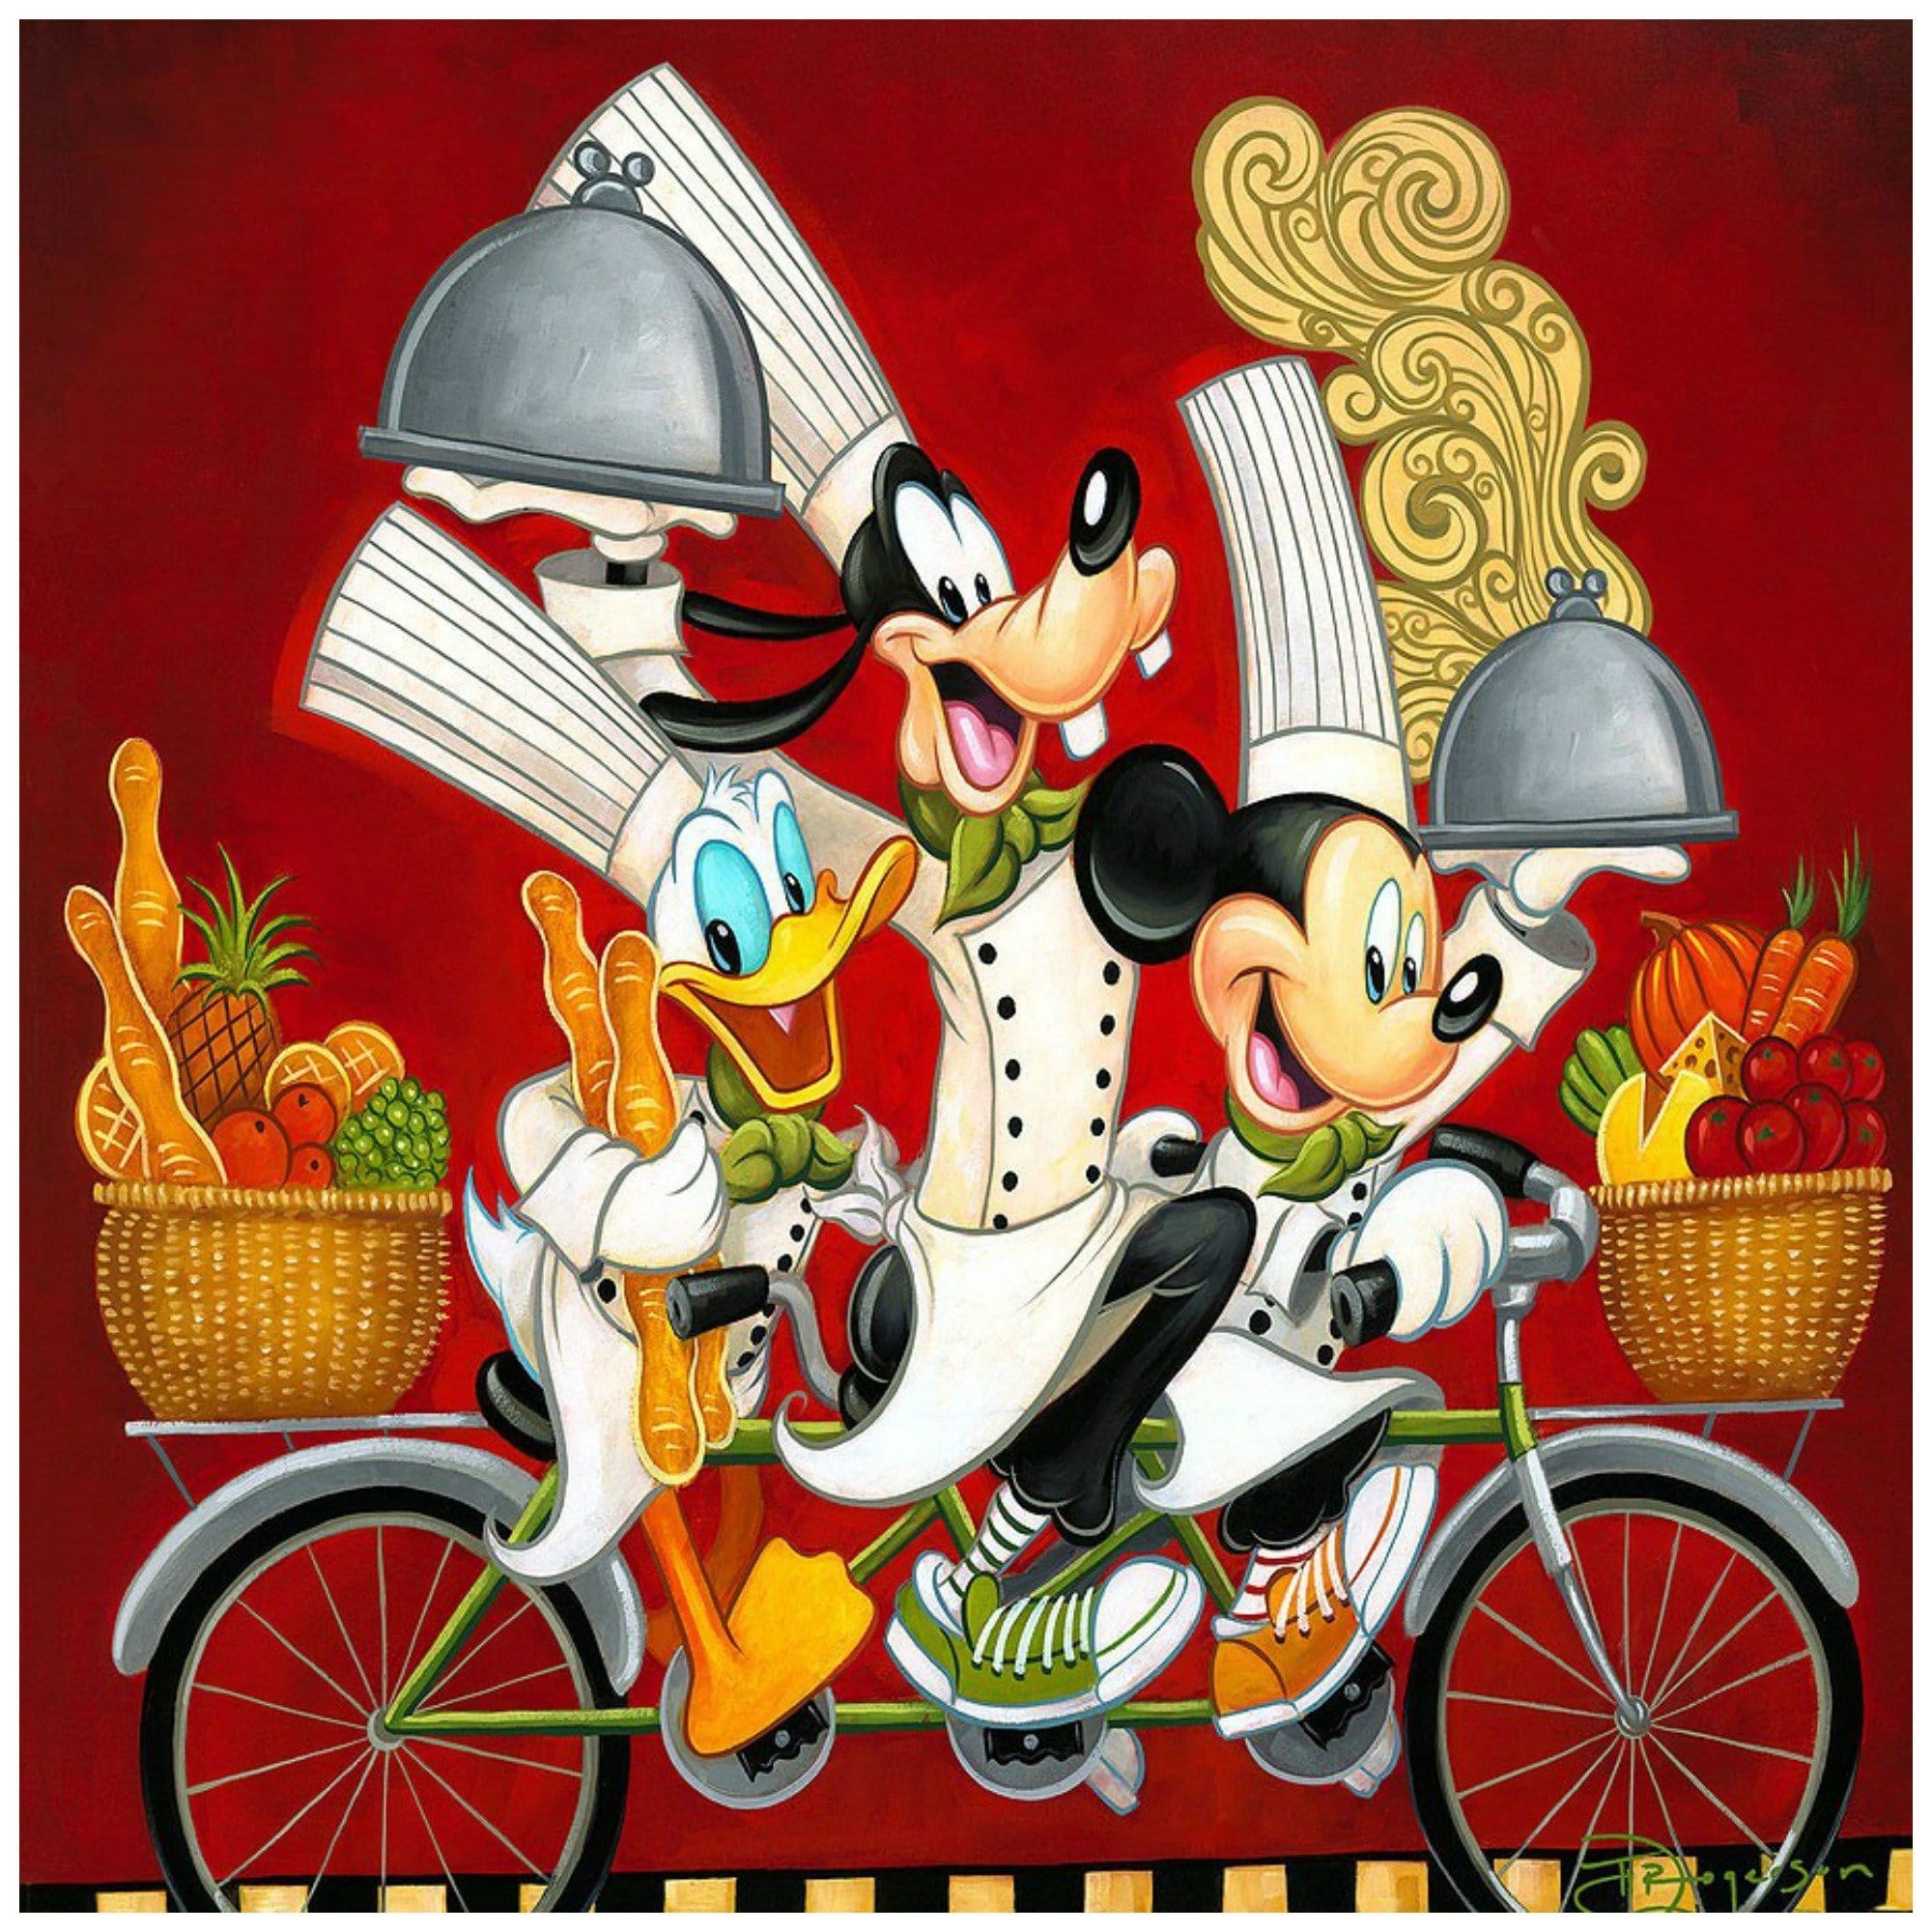 Wheeling with Flavor by Tim Rogerson  Chefs Mickey, Donald and Goofy in a joy ride on tandem bicyle are out sharing the flavors of the dishes they have prepared - Closeup